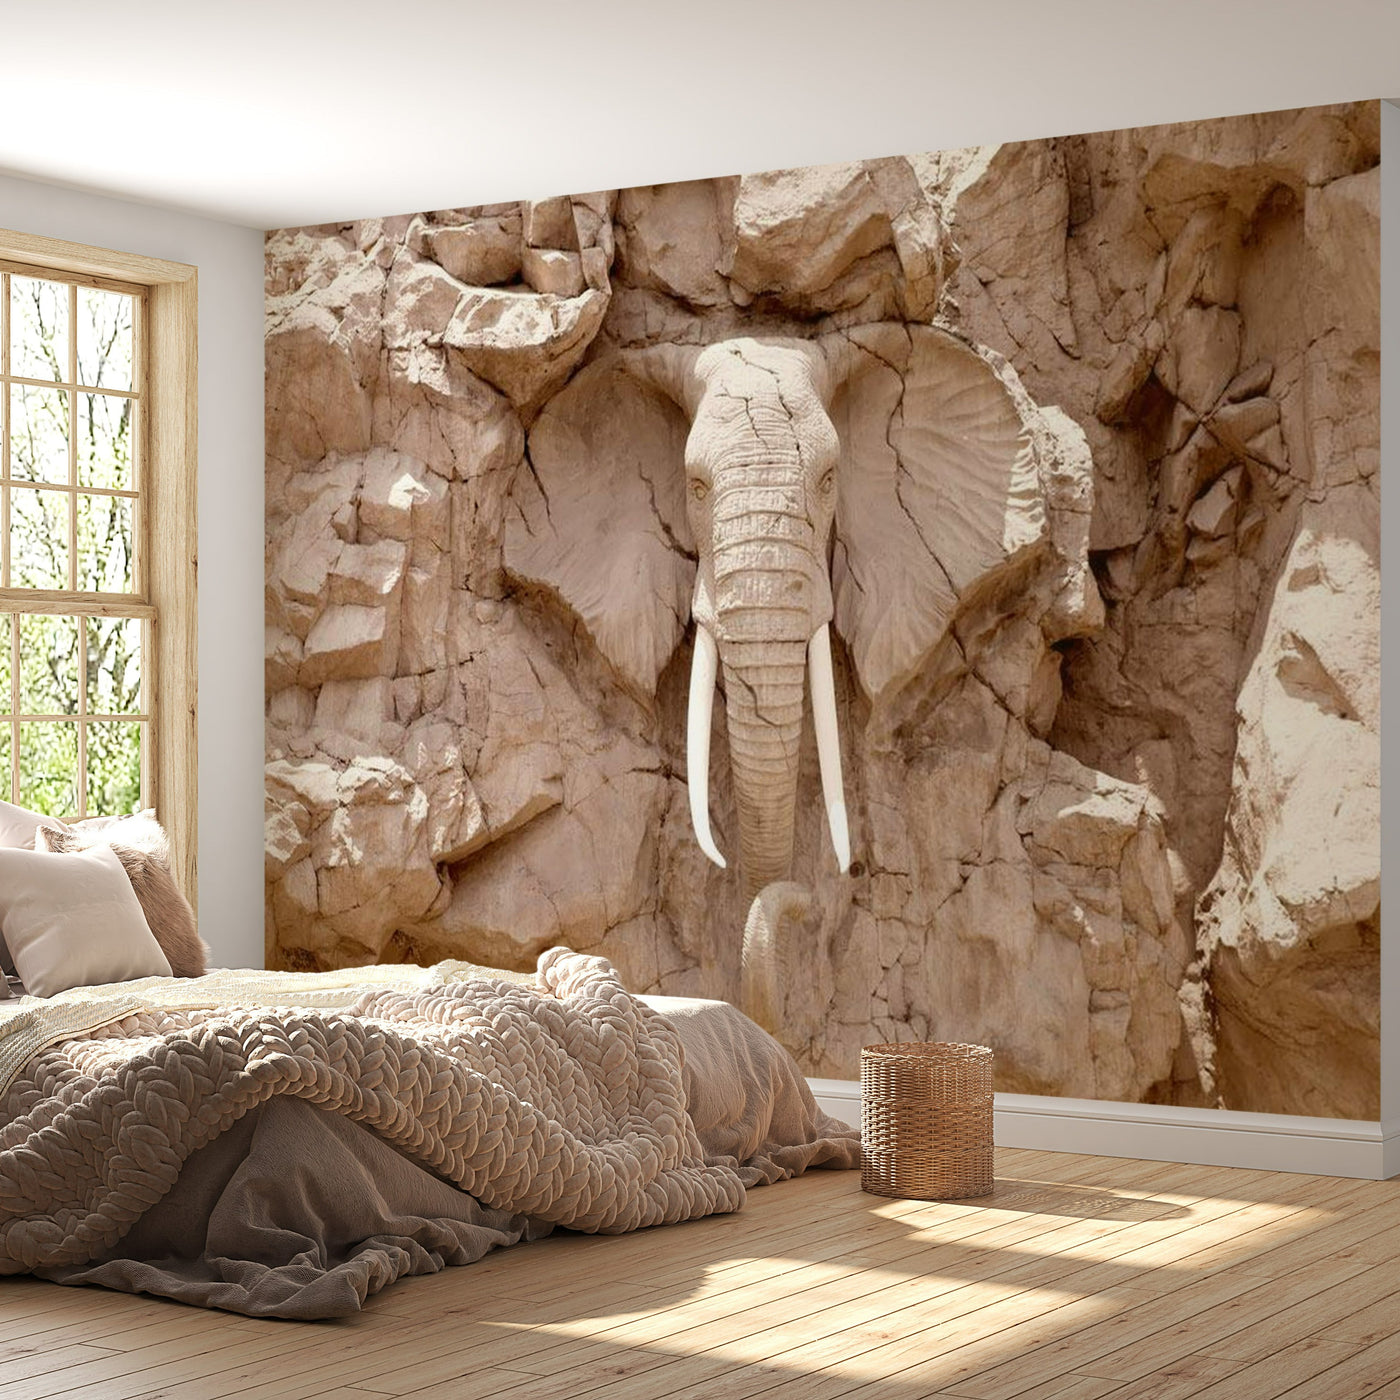 Peel & Stick Animal Wall Mural - Elephant Carving South Africa - Removable Wall Decals